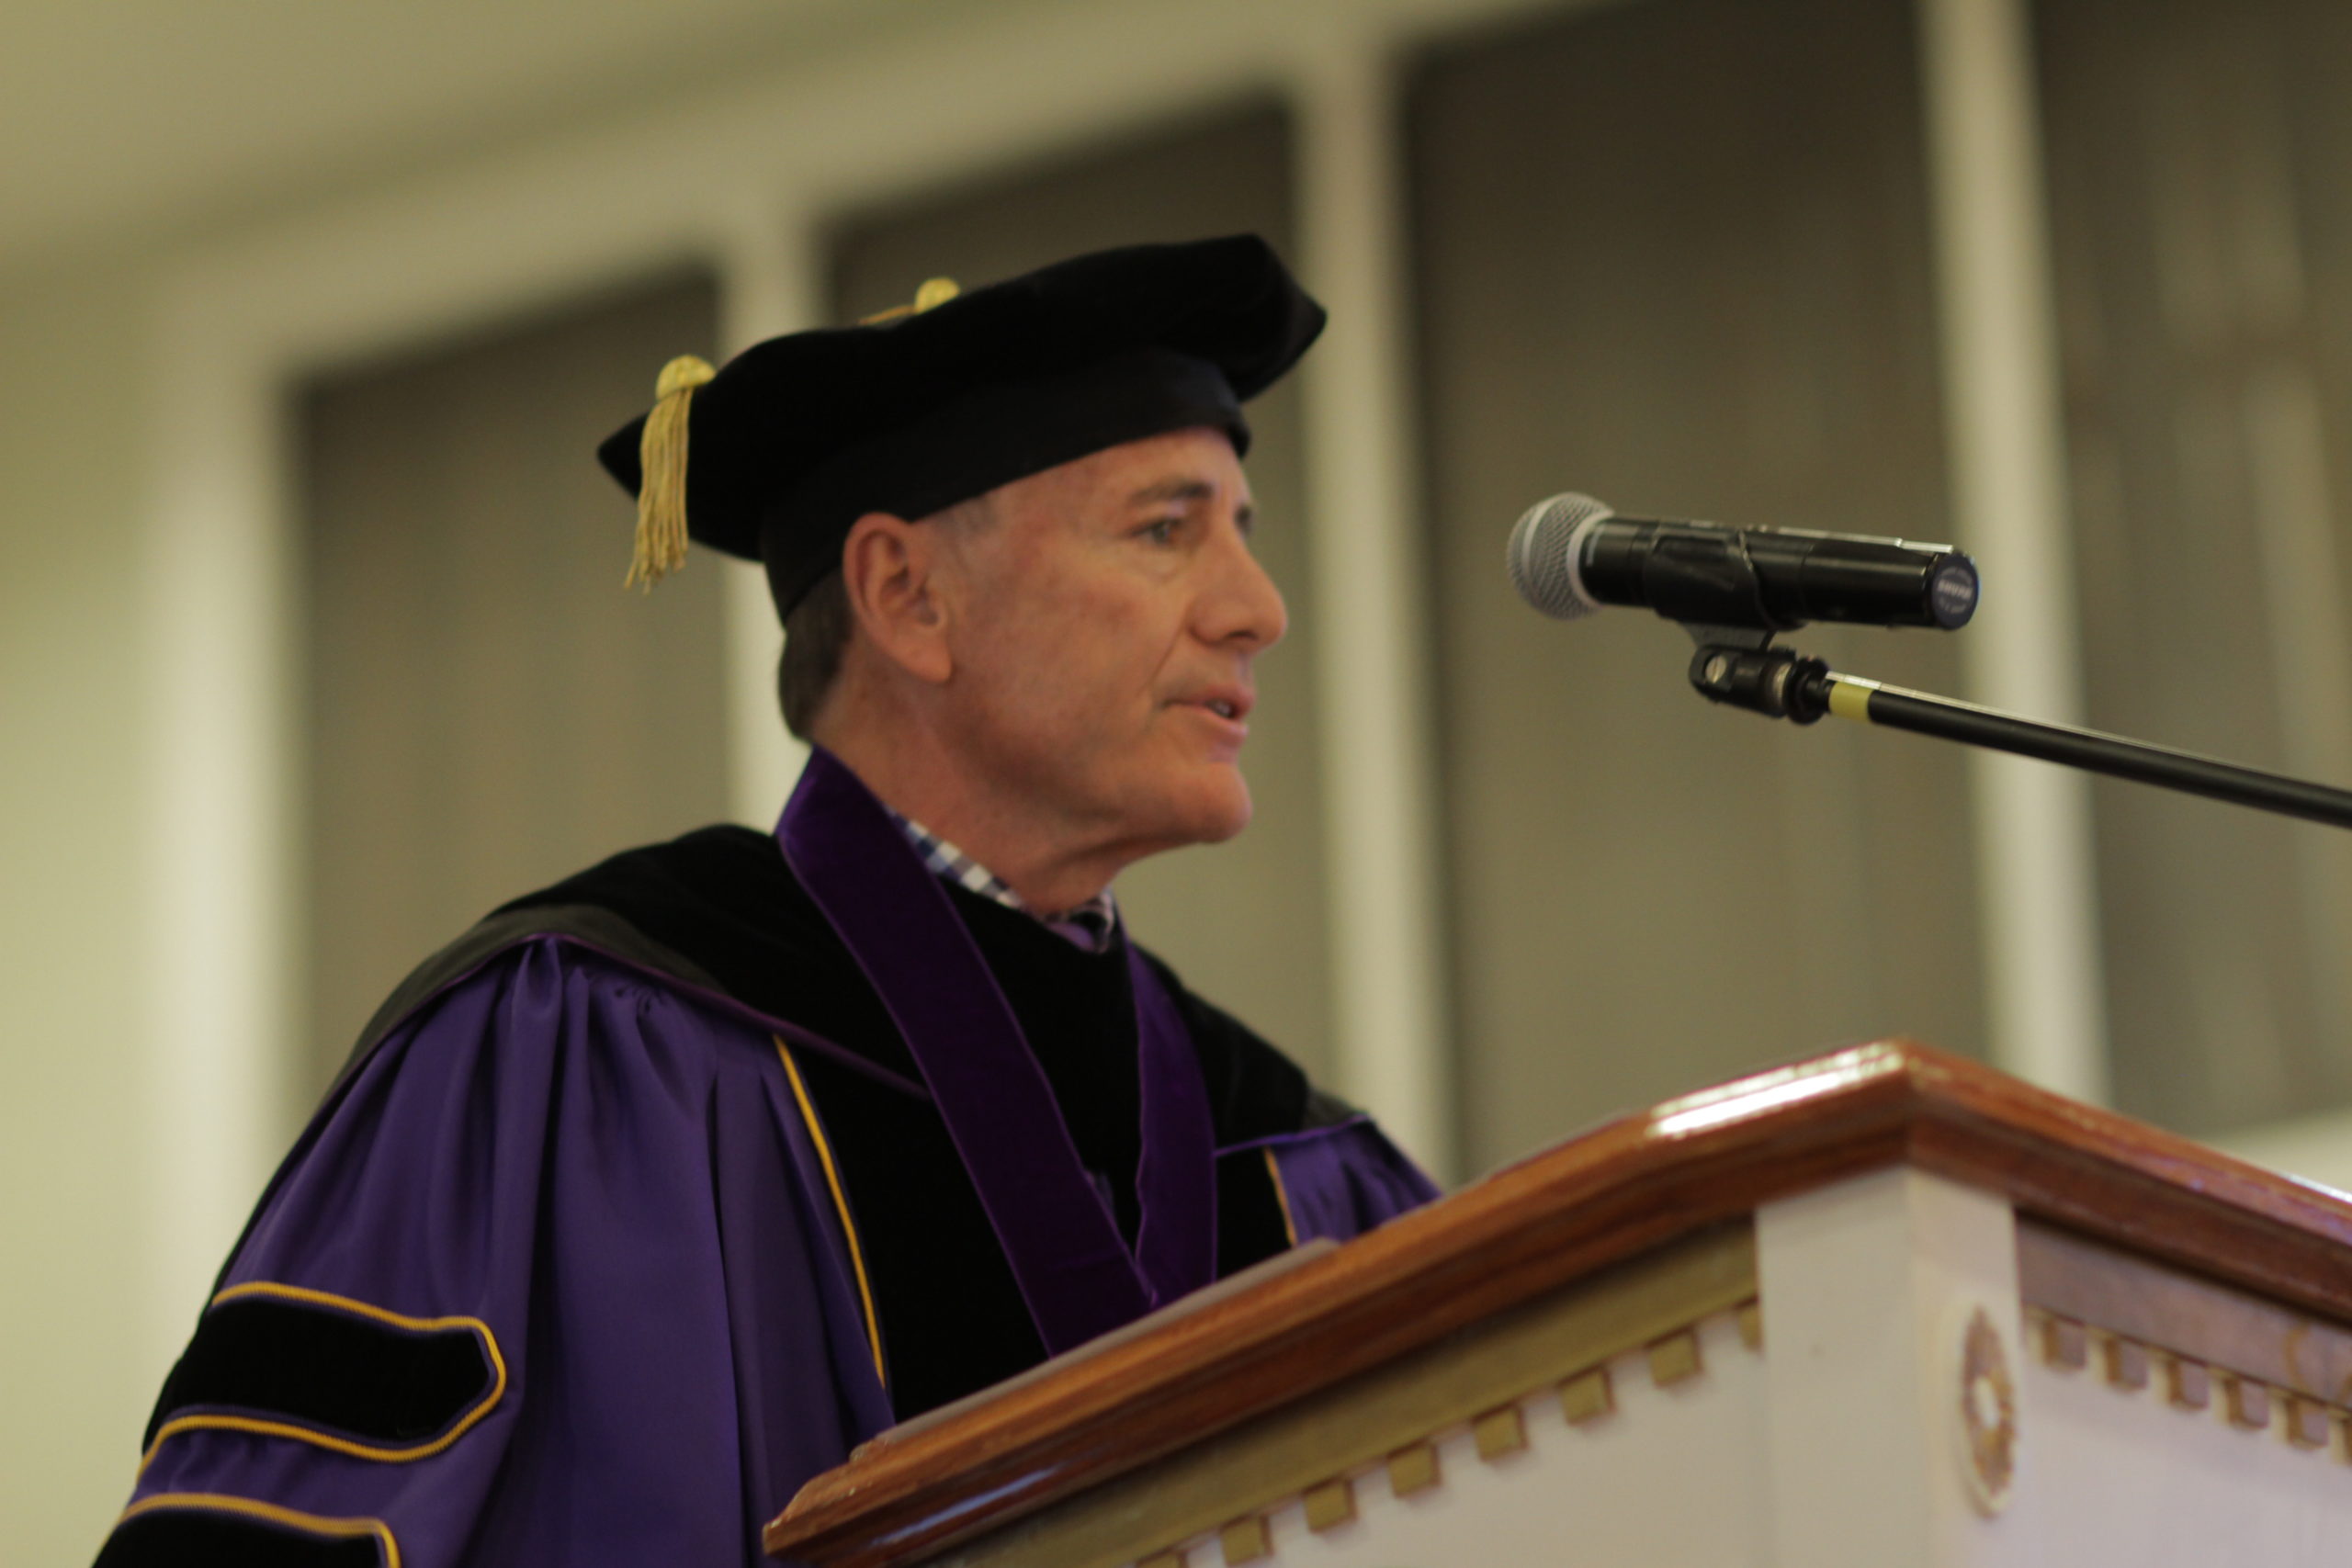 University president Dr.Carlos Campo delivers the opening speech for the honors commencement.